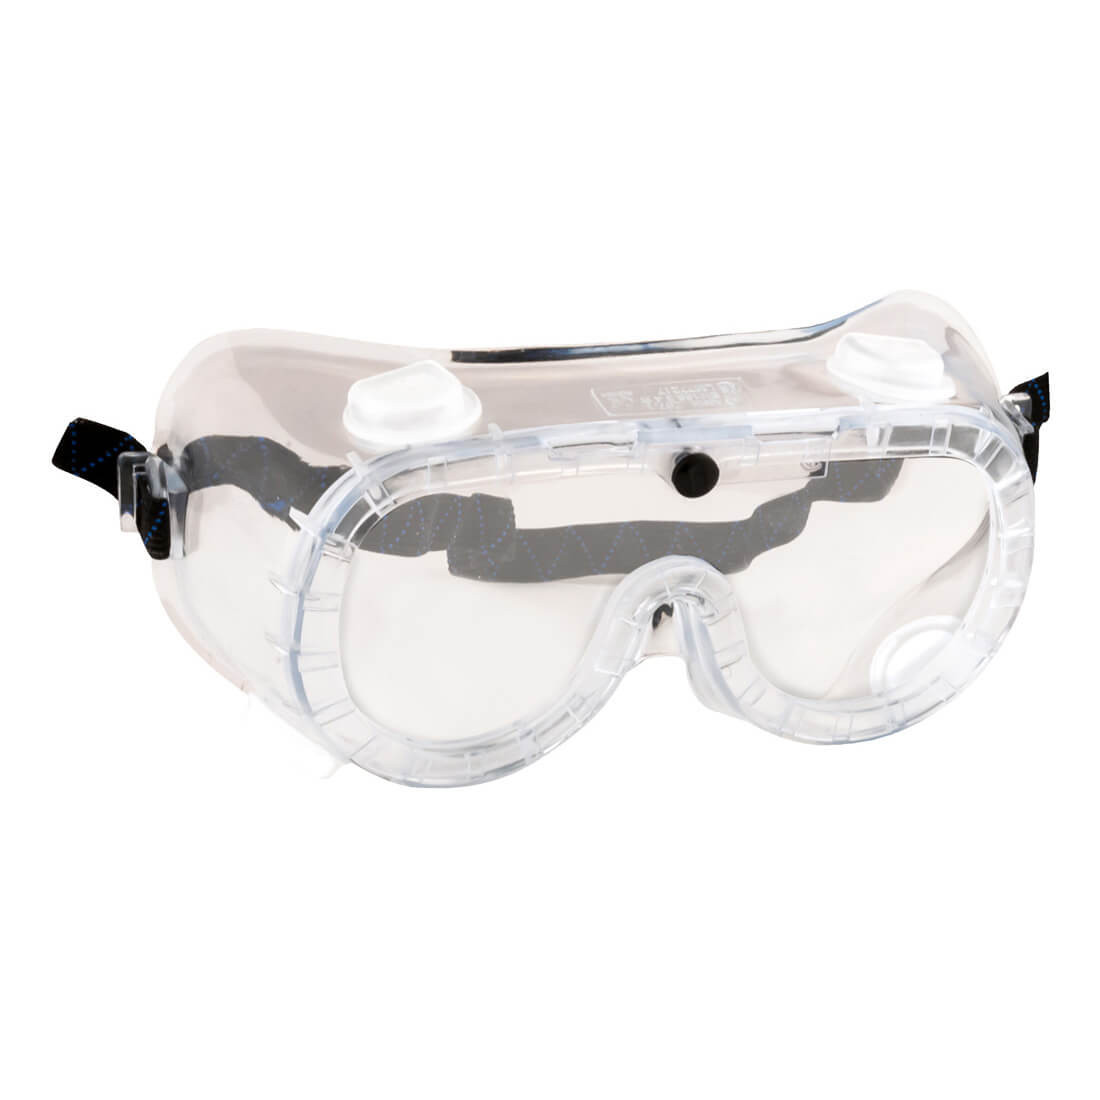 Indirect Vent Goggle - Personal protection